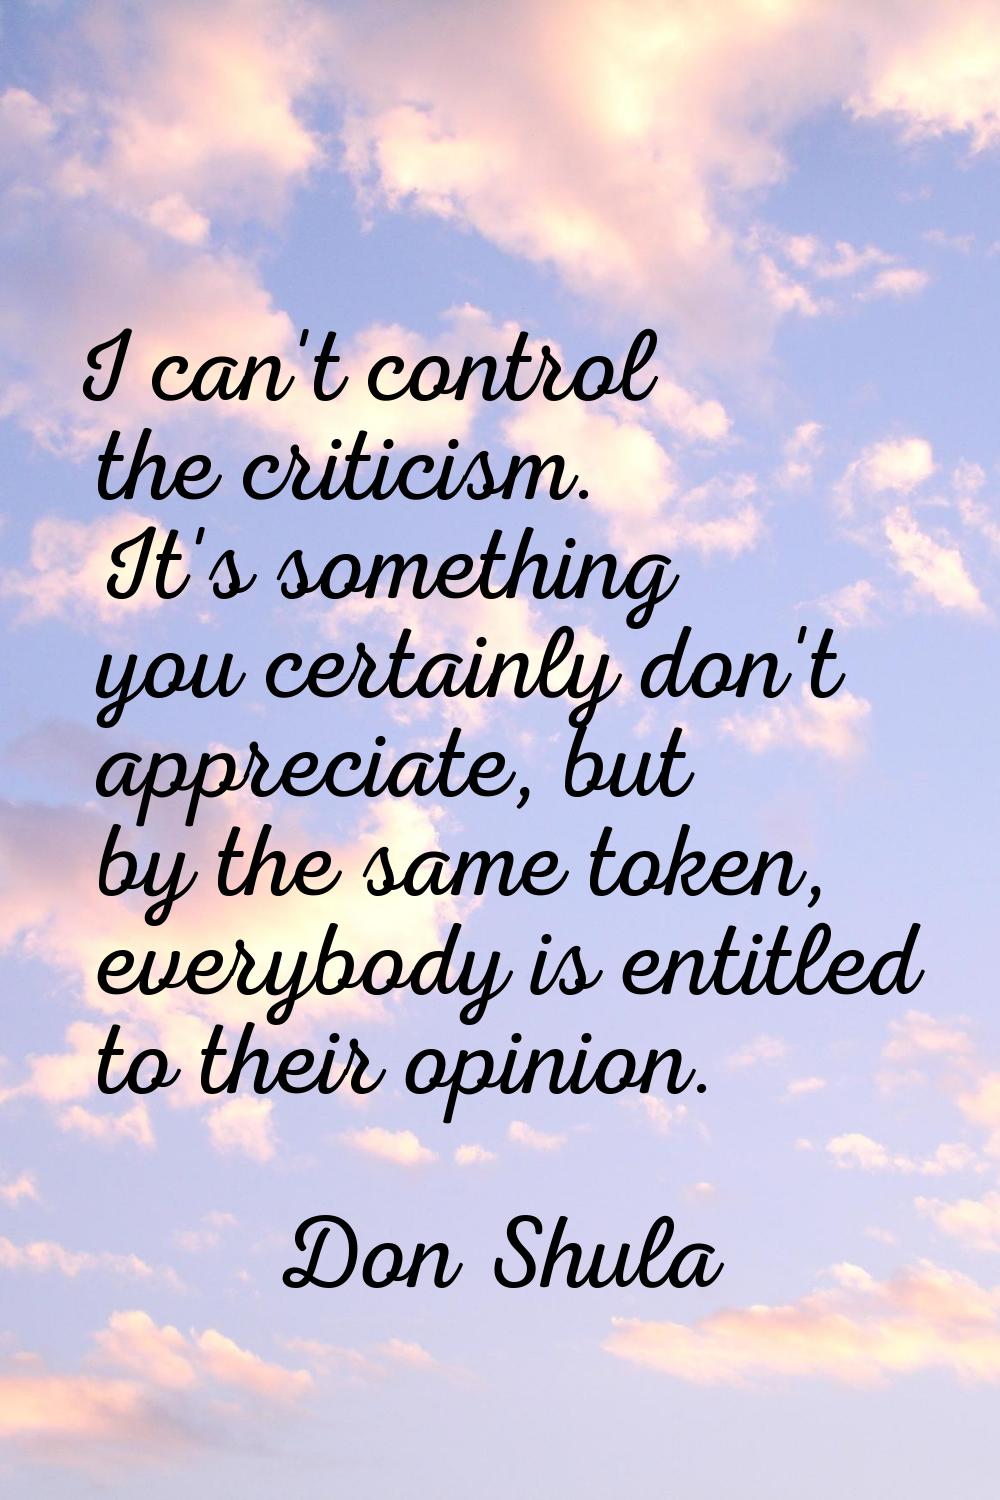 I can't control the criticism. It's something you certainly don't appreciate, but by the same token